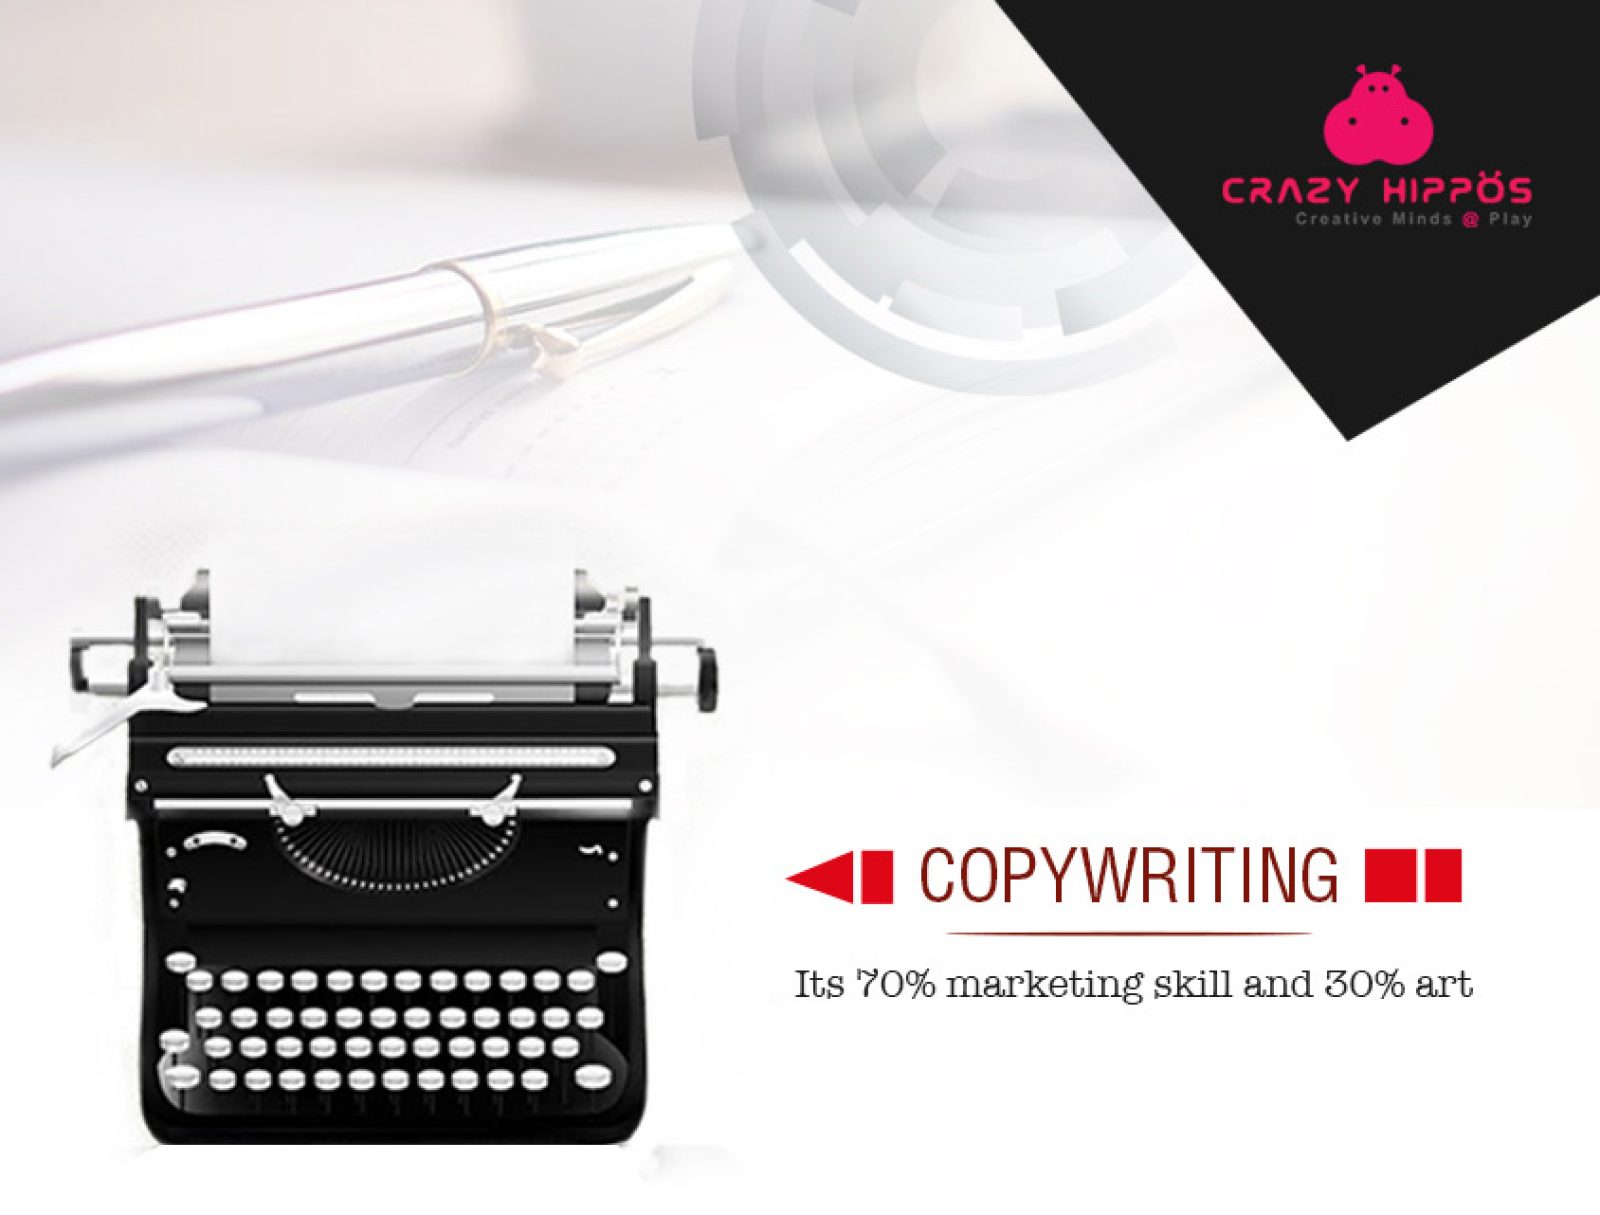 WHAT IS COPY IN COPYWRITING?